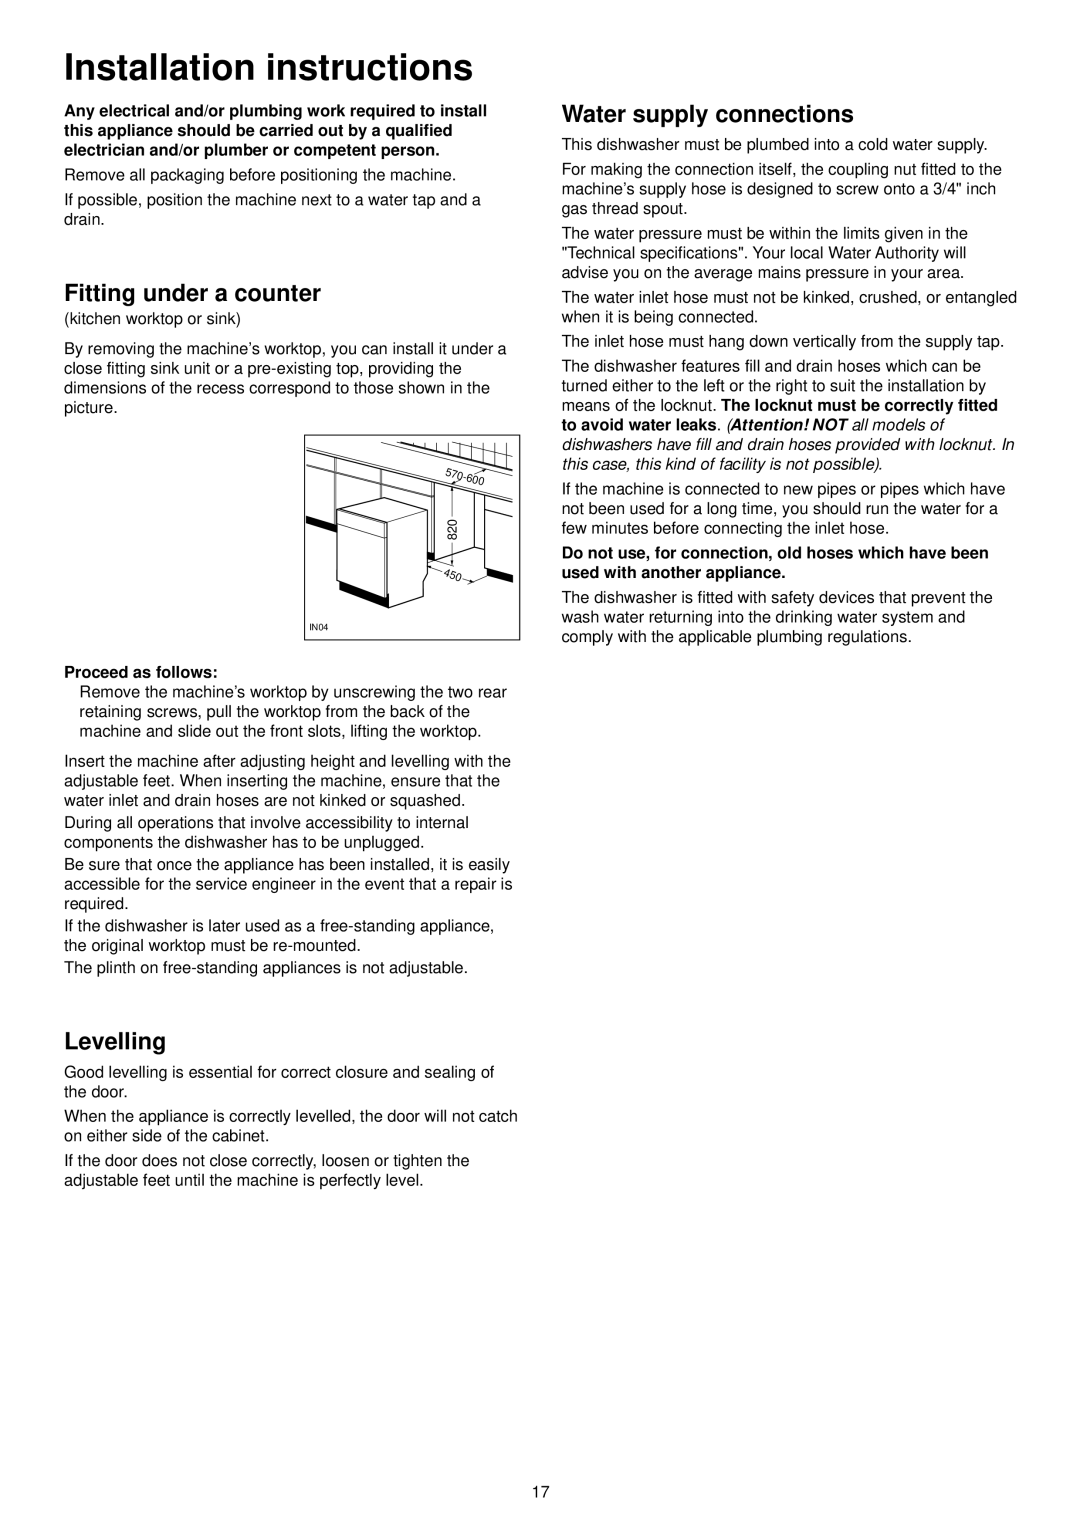 Tricity Bendix BDW 46 manual Installation instructions, Fitting under a counter, Levelling, Water supply connections 